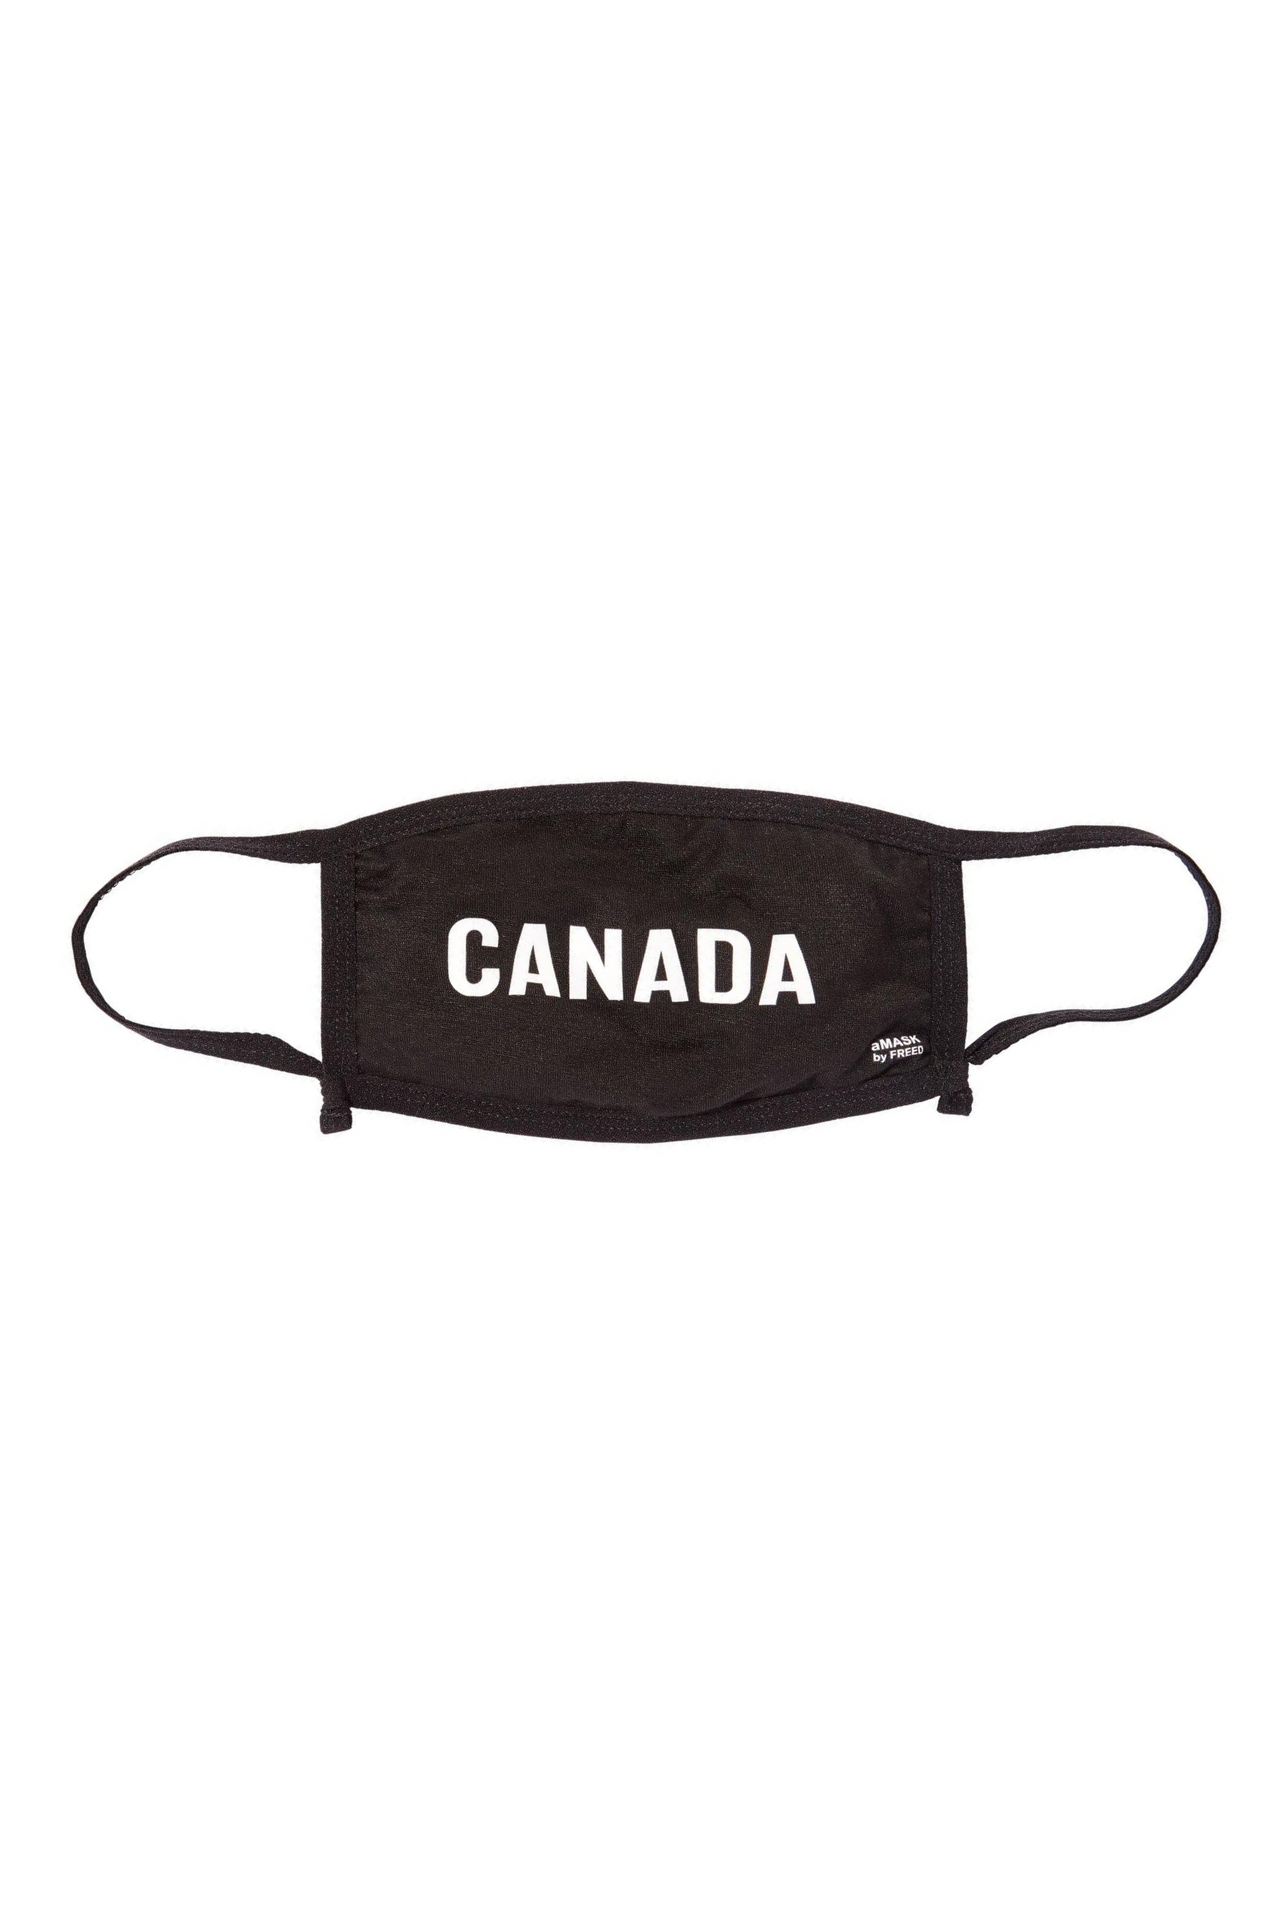 CANADA - ADULT FACE MASK